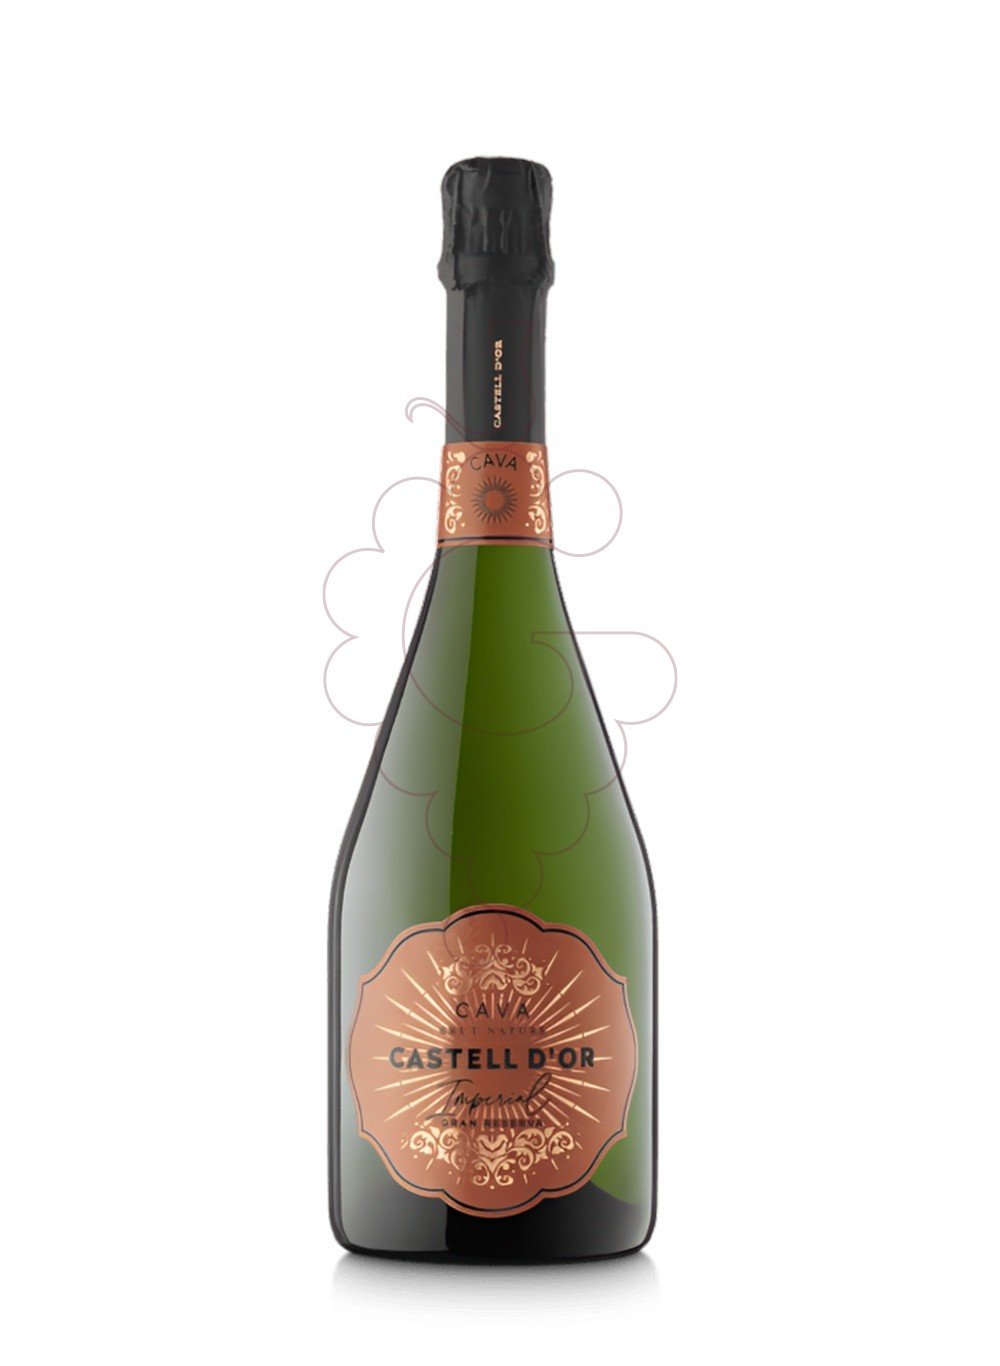 Photo Castell d'or imperial g.reserv sparkling wine